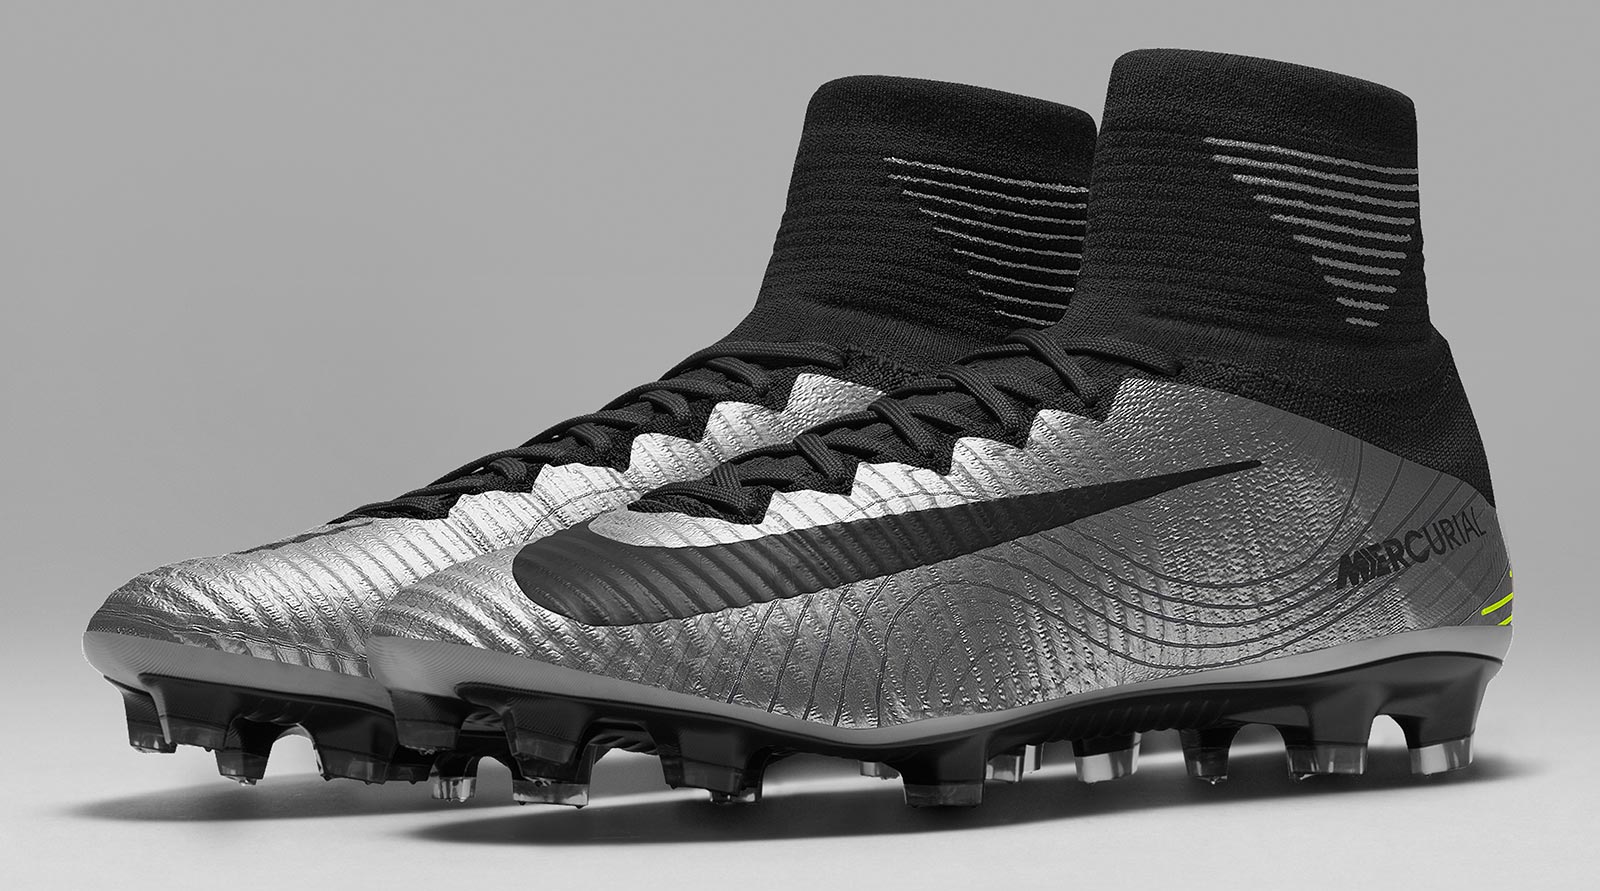 punto final castillo Comparar Nike Mercurial Superfly V Cristiano Ronaldo Chapter 3 iD Boots Launched -  Footy Headlines